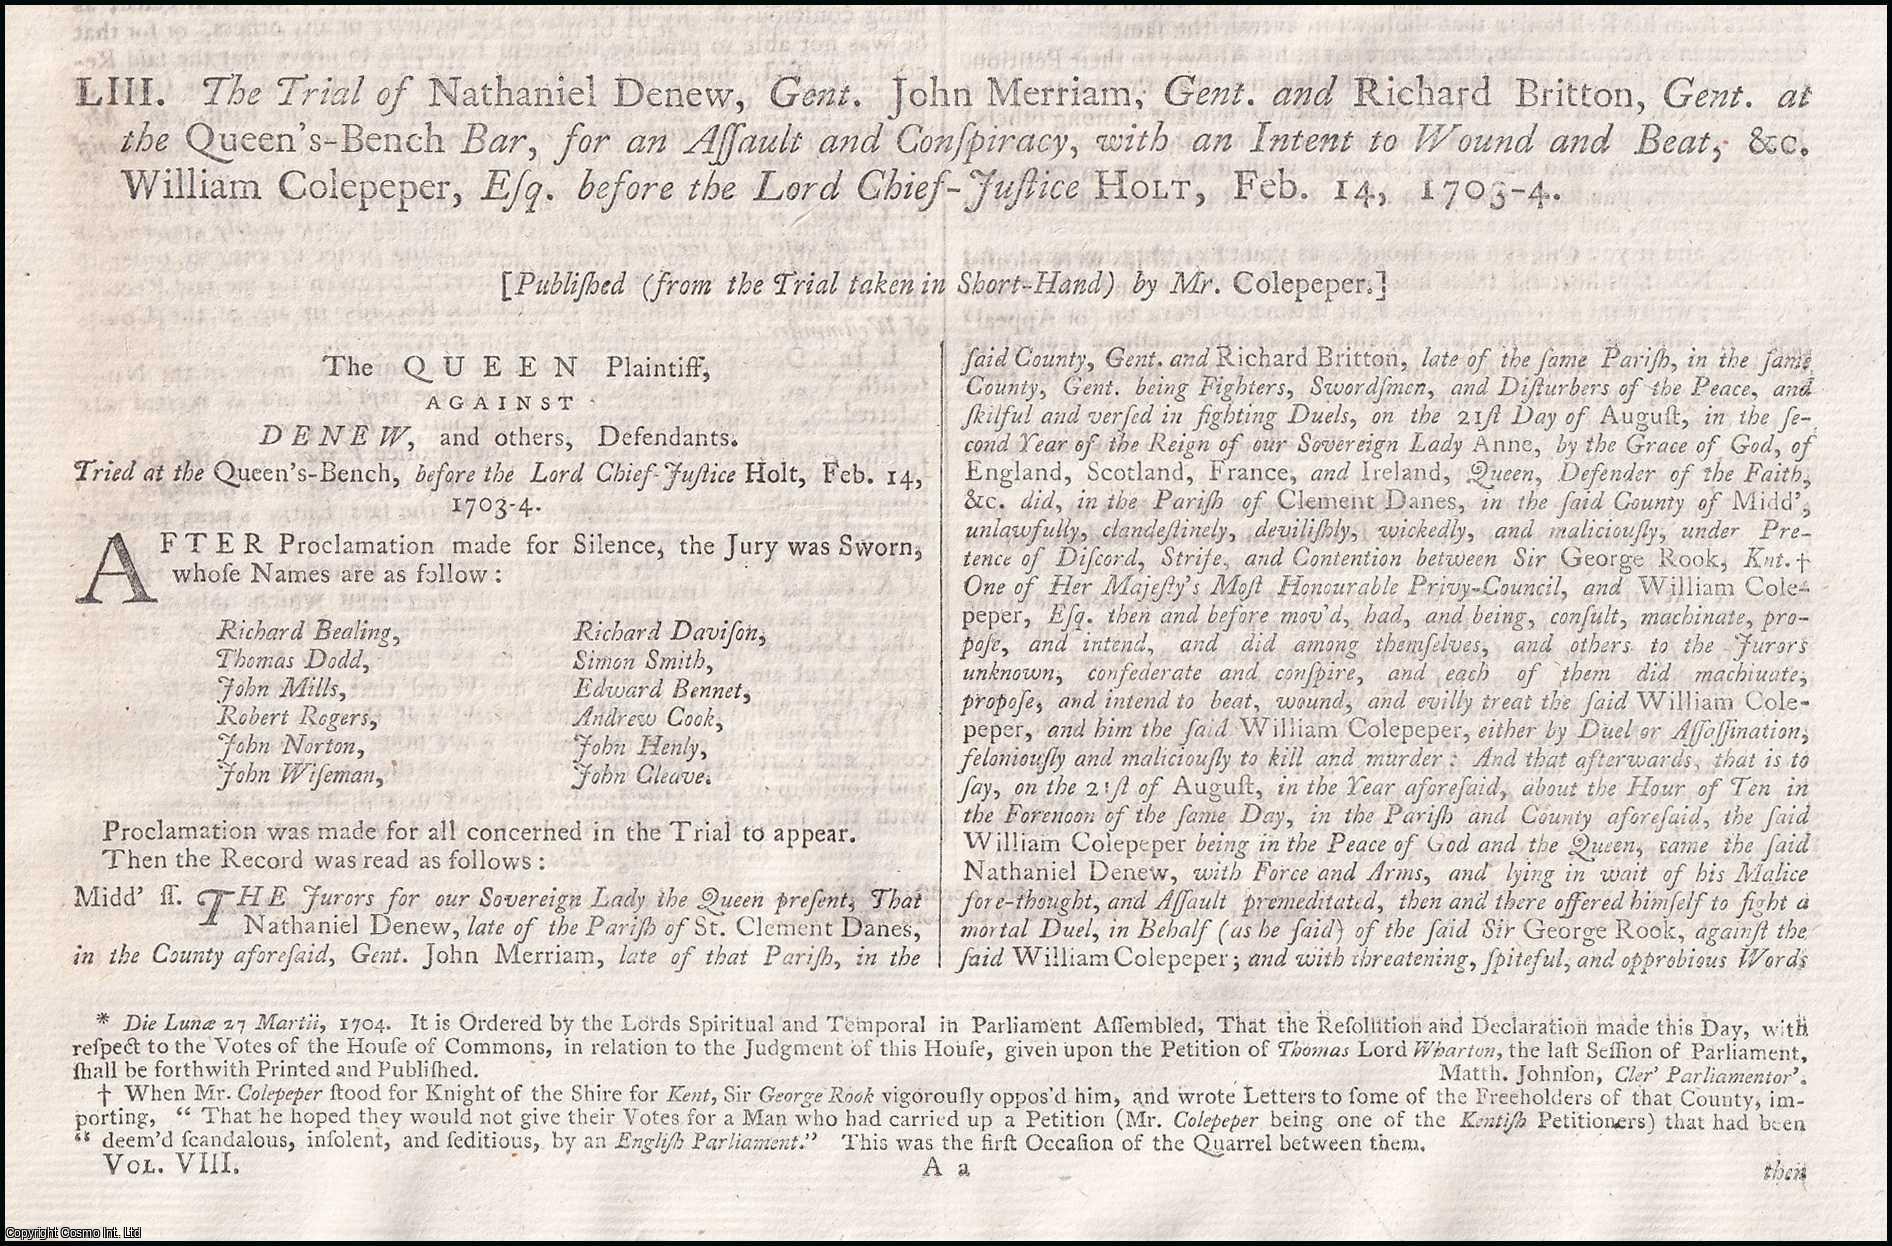 [Trial]. - The Trial of Nathaniel Denew, Gent. John Merriam, Gent. and Richard Britton, Gent. at the Queen's Bench Bar, for an Assualt and Conspiracy, with an Intent to Wound and Beat, &c. William Colepeper, Esq. before the Lord Chief-Justice Holt, February 14th, 1703-4. An original report from the Collected State Trials.